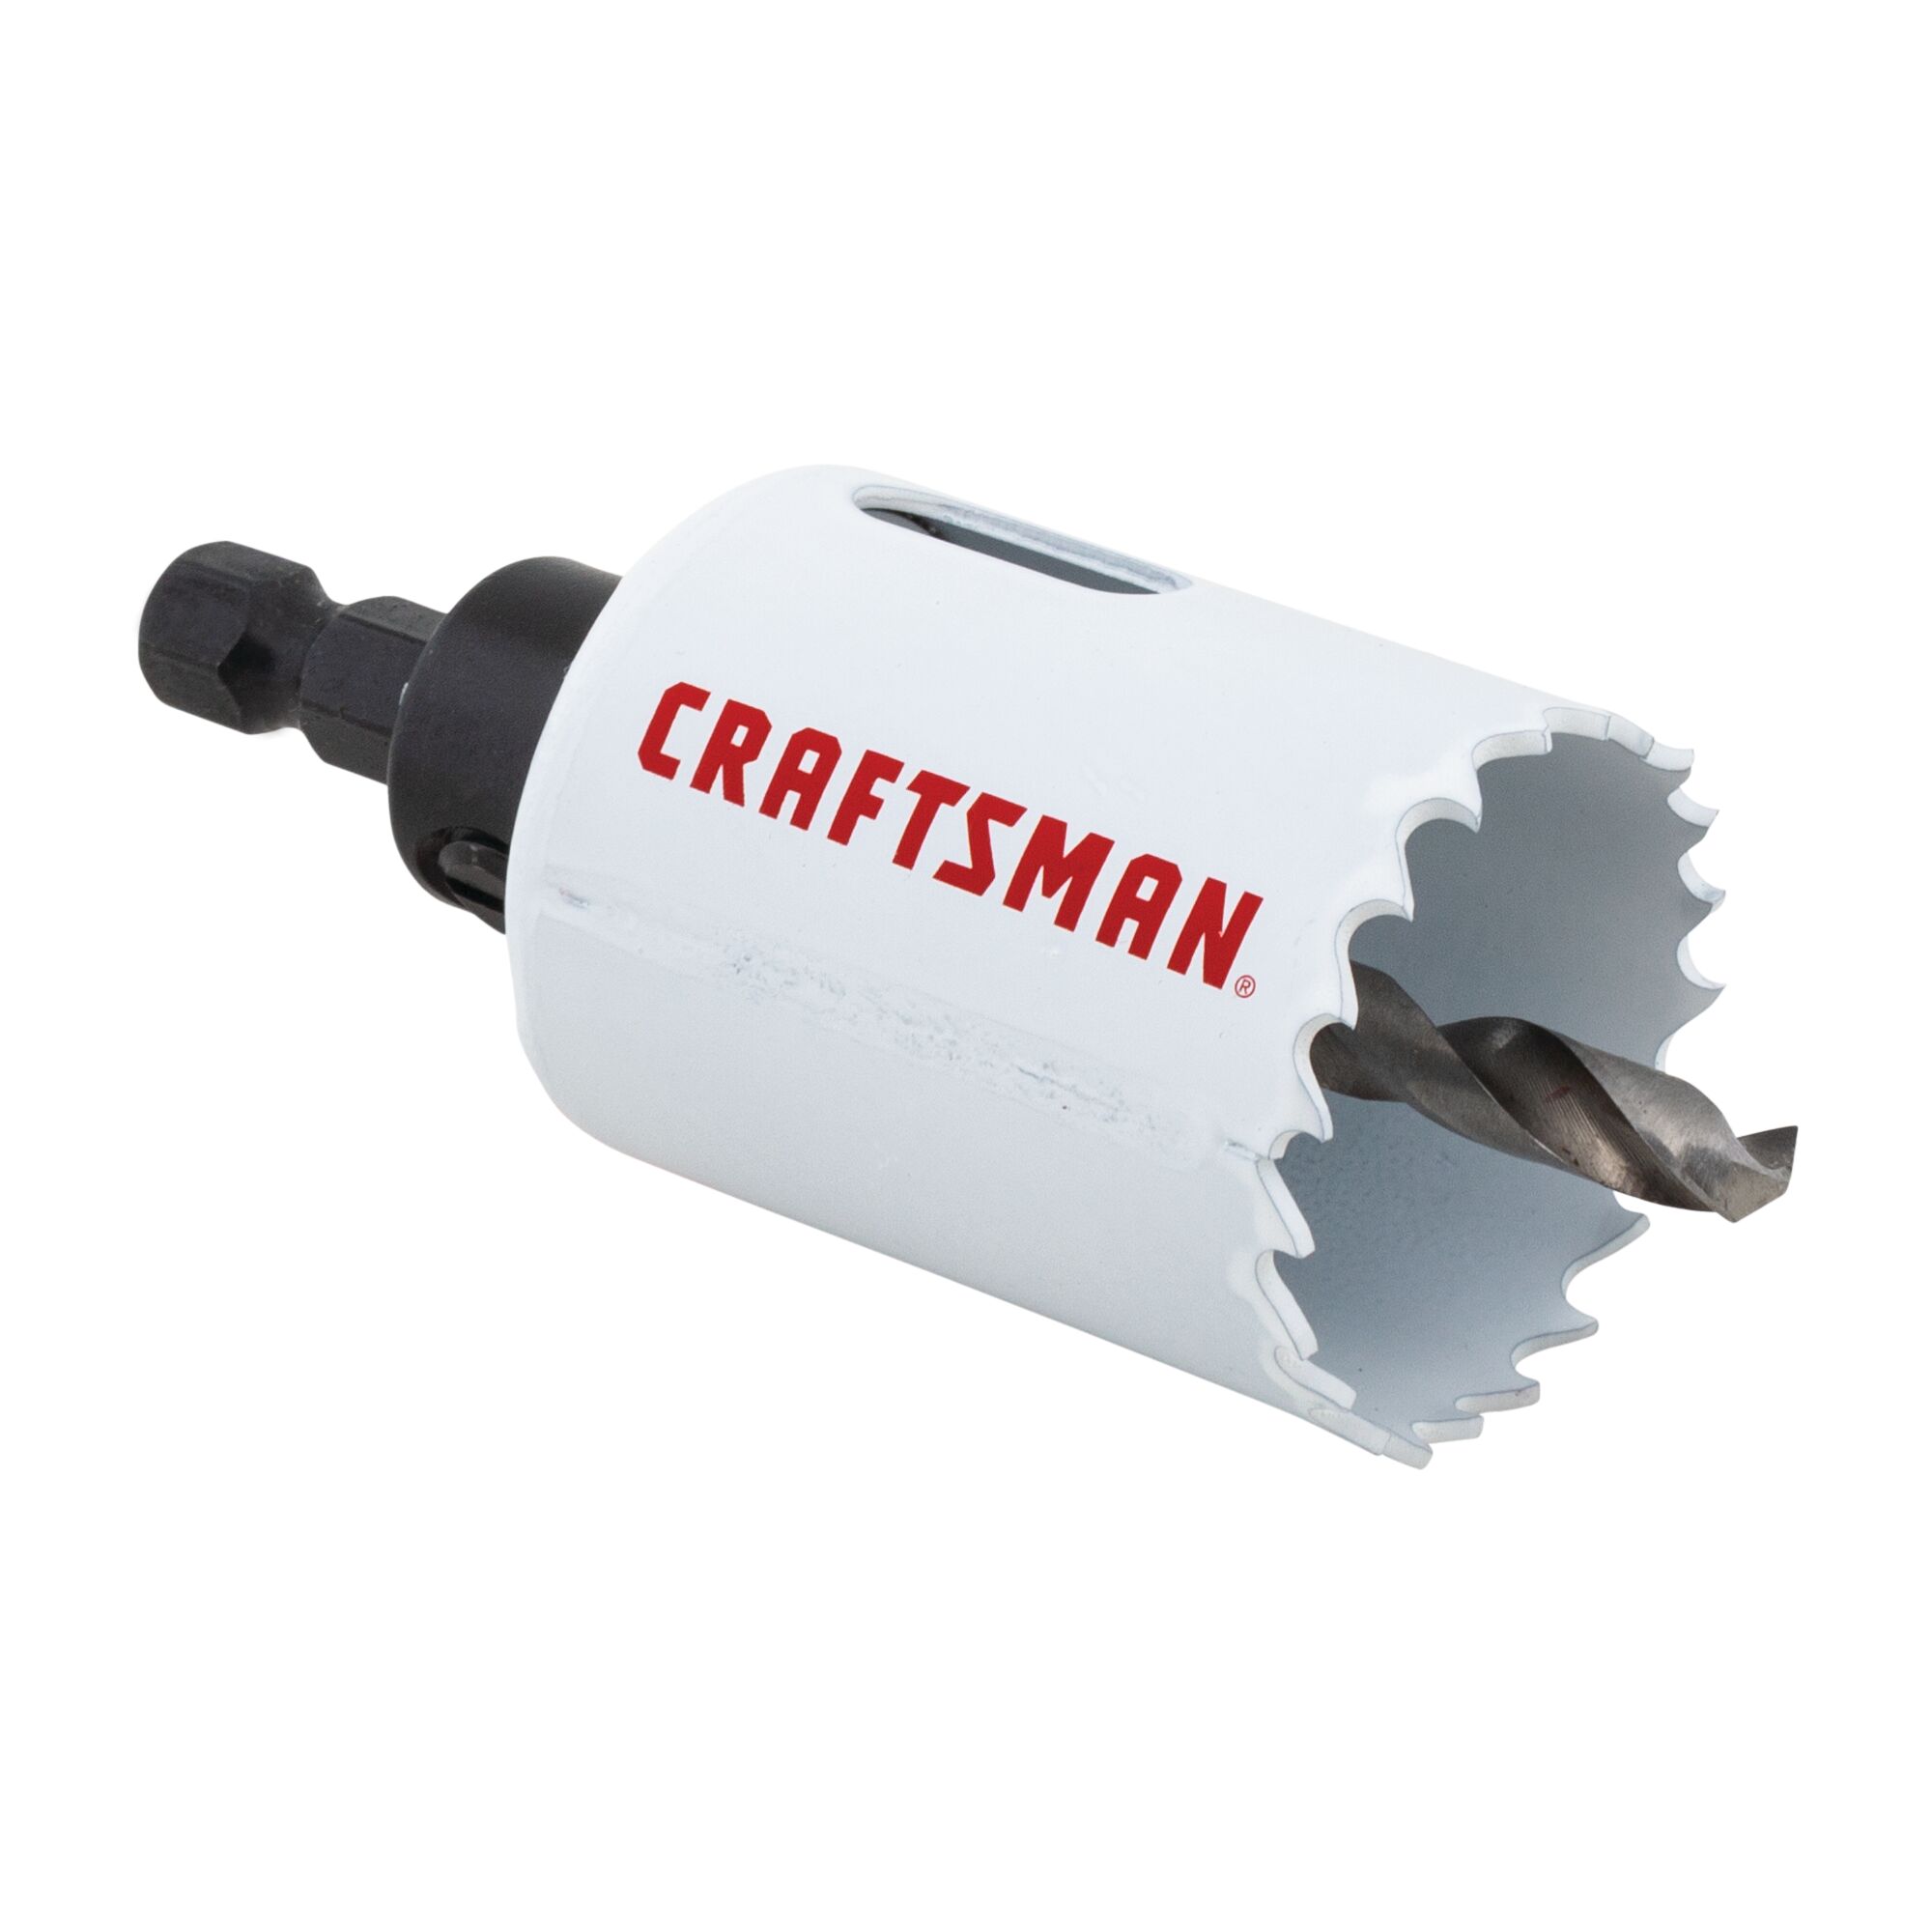 View of CRAFTSMAN Hole Saws on white background